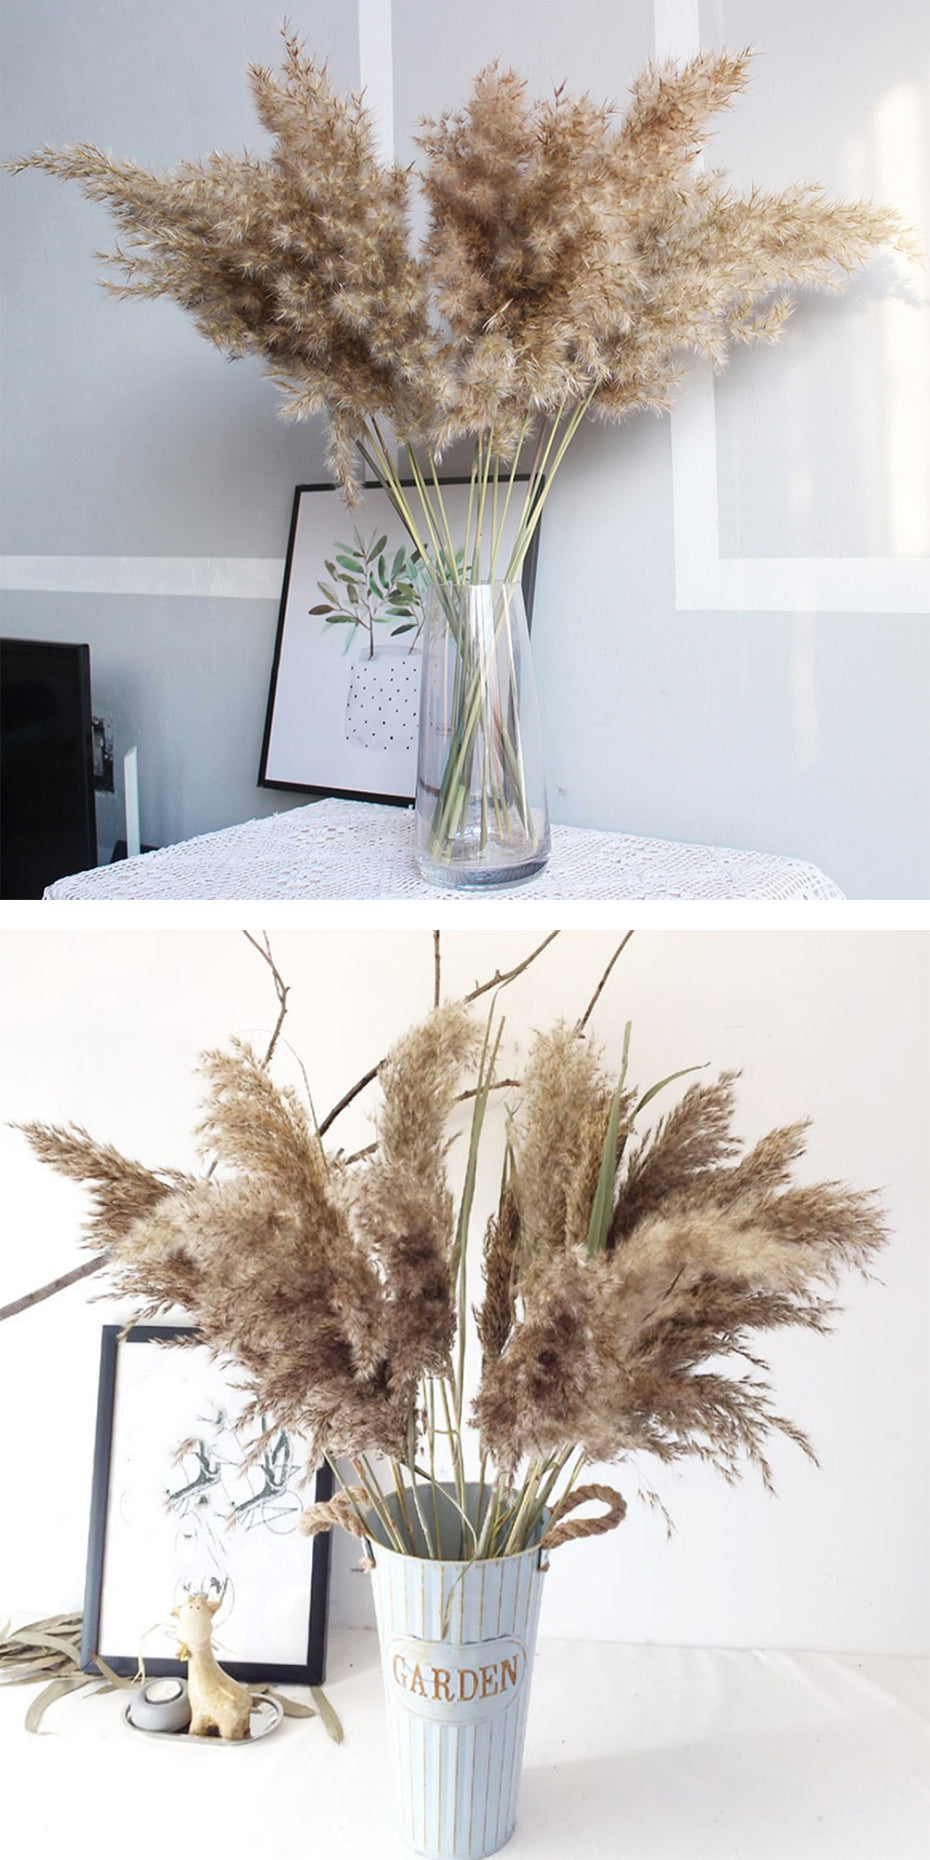 Real Dried Pampas Grass Bouquet Bohemian Decor Natural Dried Fluffy Plants For Dining Room Kitchen Decoration Living Room Boho Style Home Interior Design